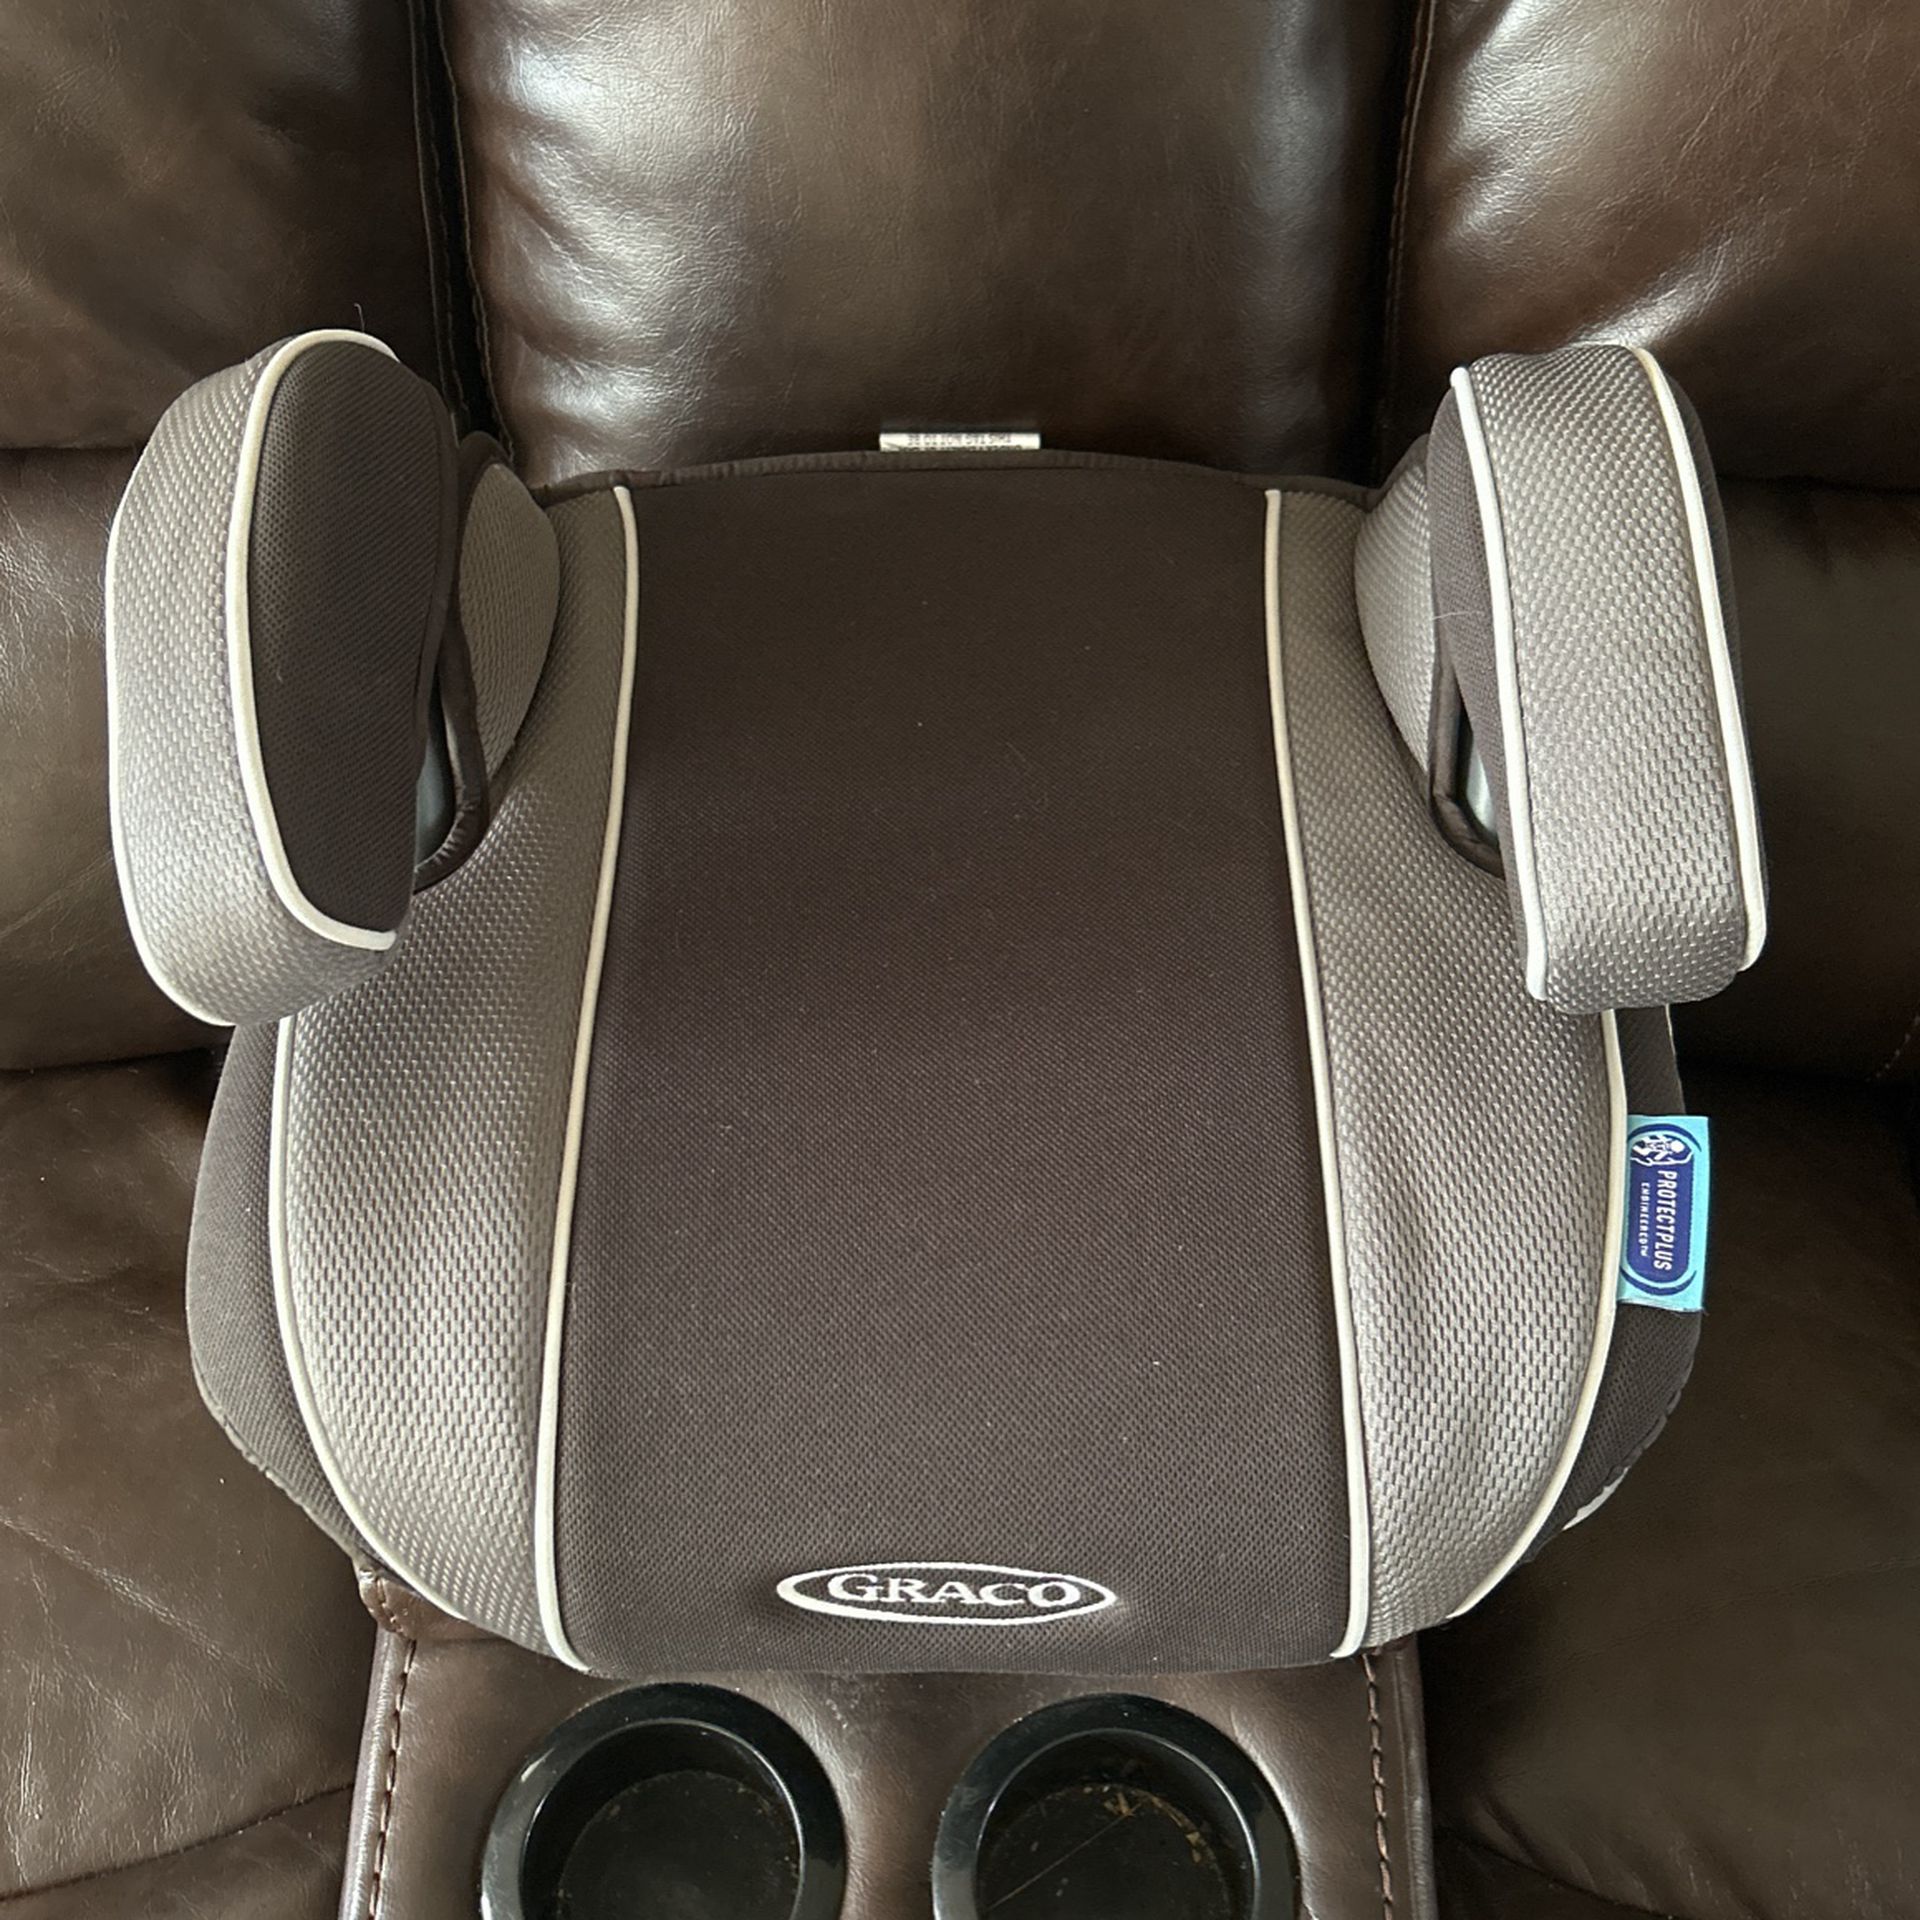 Graco booster seat. Literally Never Used Smoke Free Home 